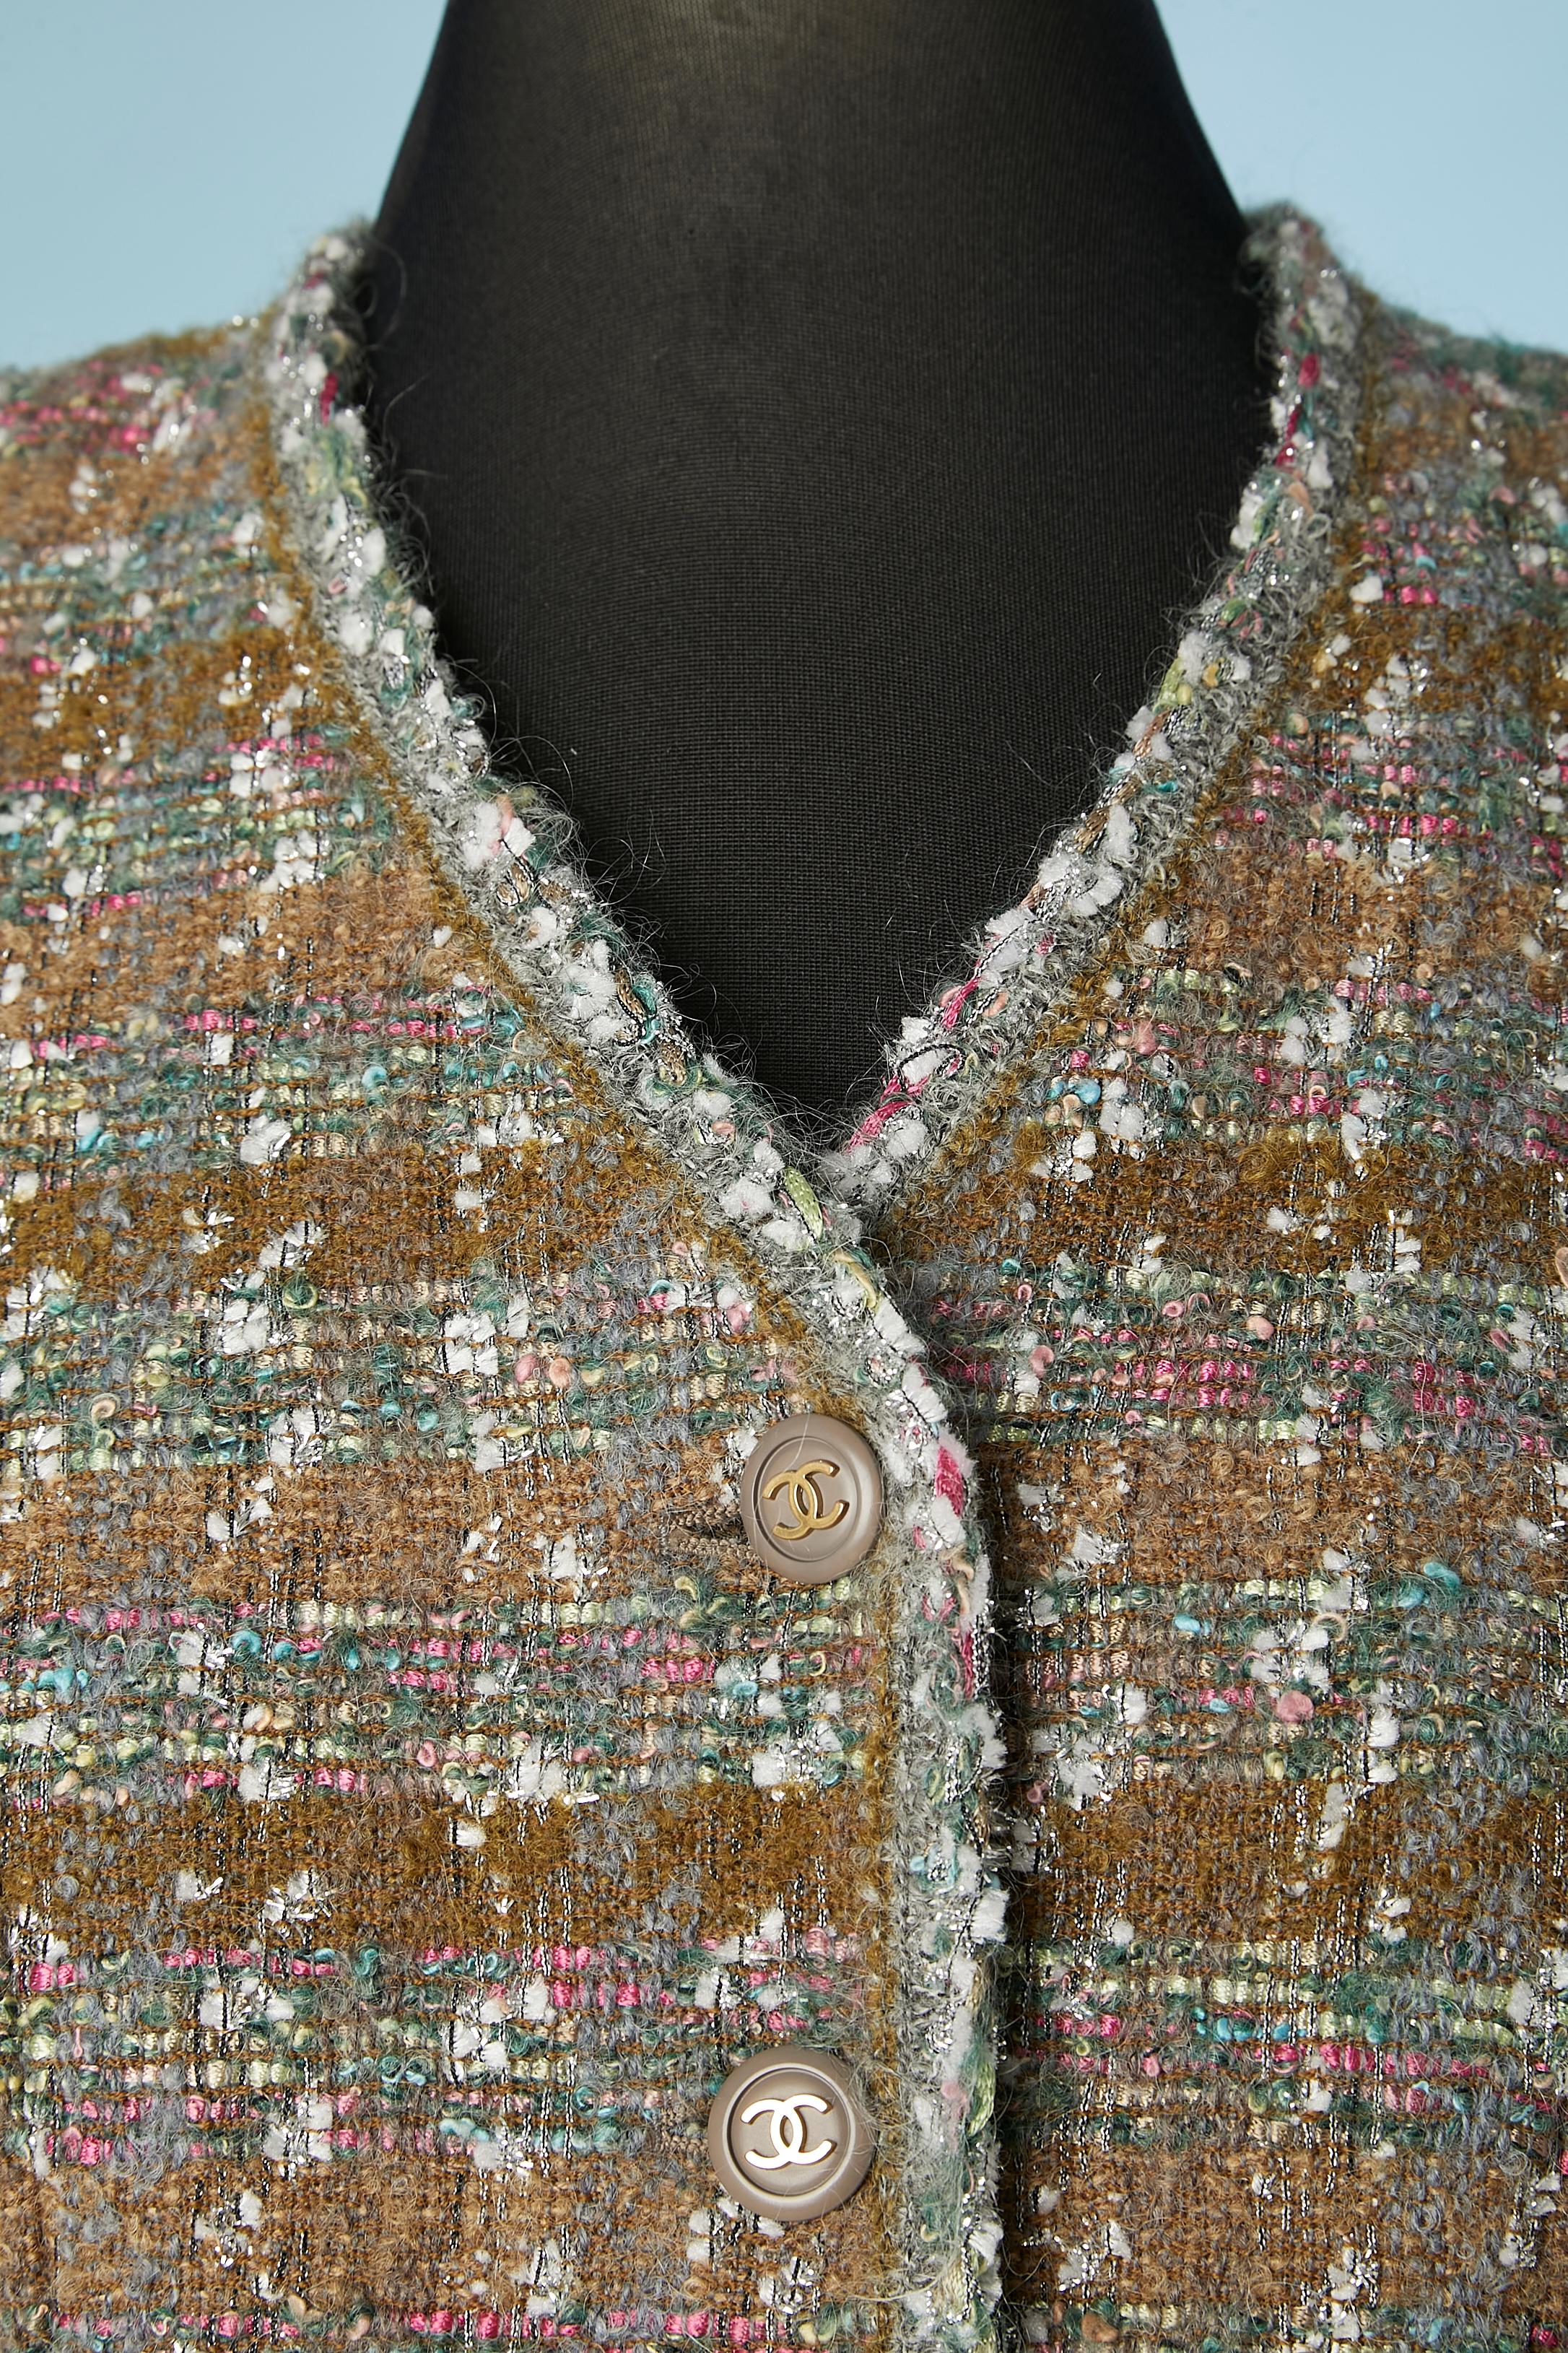 Lurex and tweed single-breasted jacket. Shoulder pads. Chain inside in the bottom edge. Silk branded lining. Branded buttons.
SIZE 40 (M) 